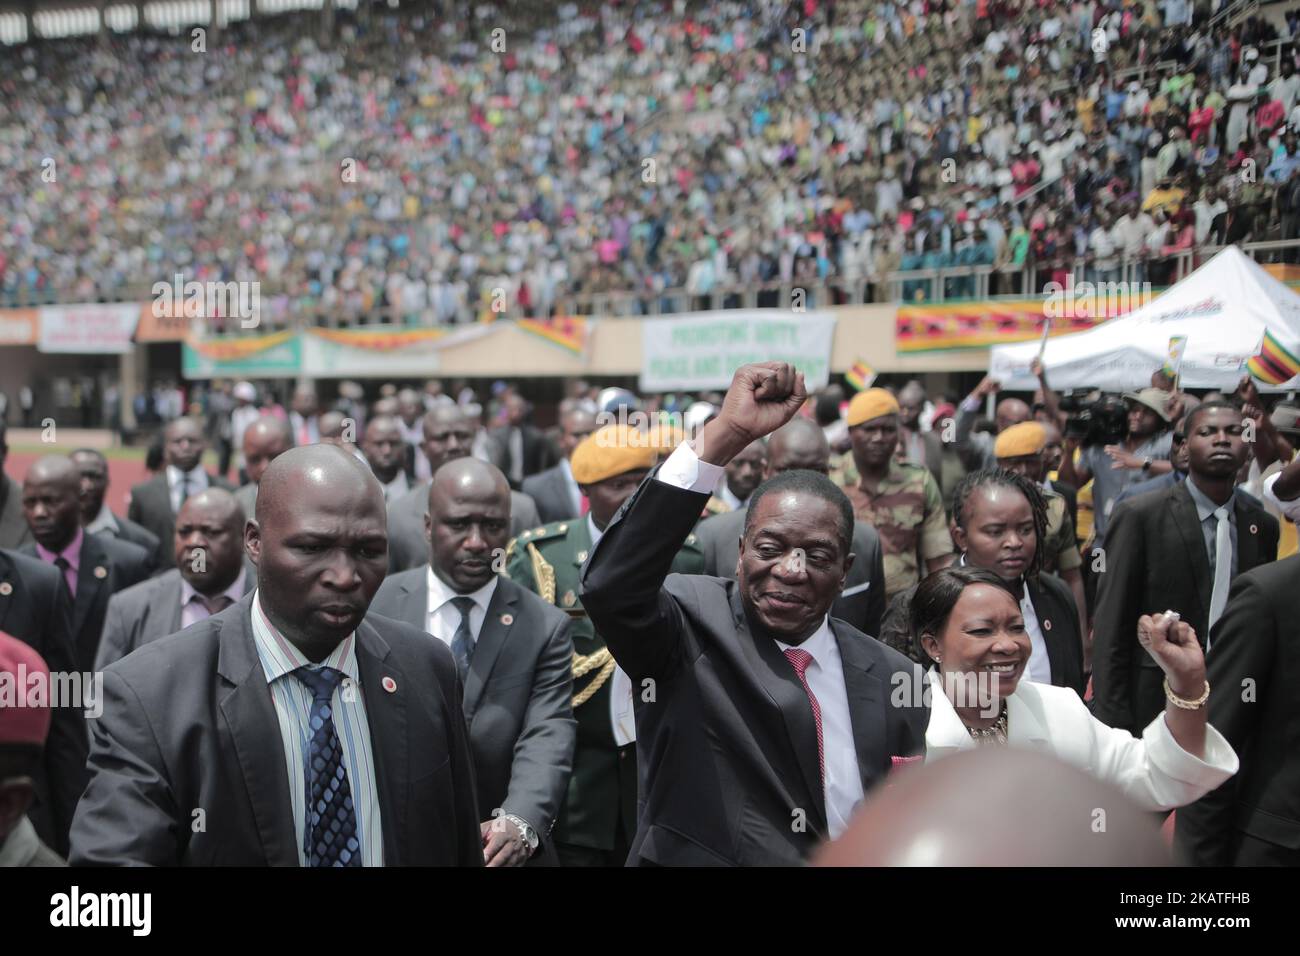 The President Emmerson Mnangagwa And His Wife Greet Zimbabweans During His Inauguration Ceremony 